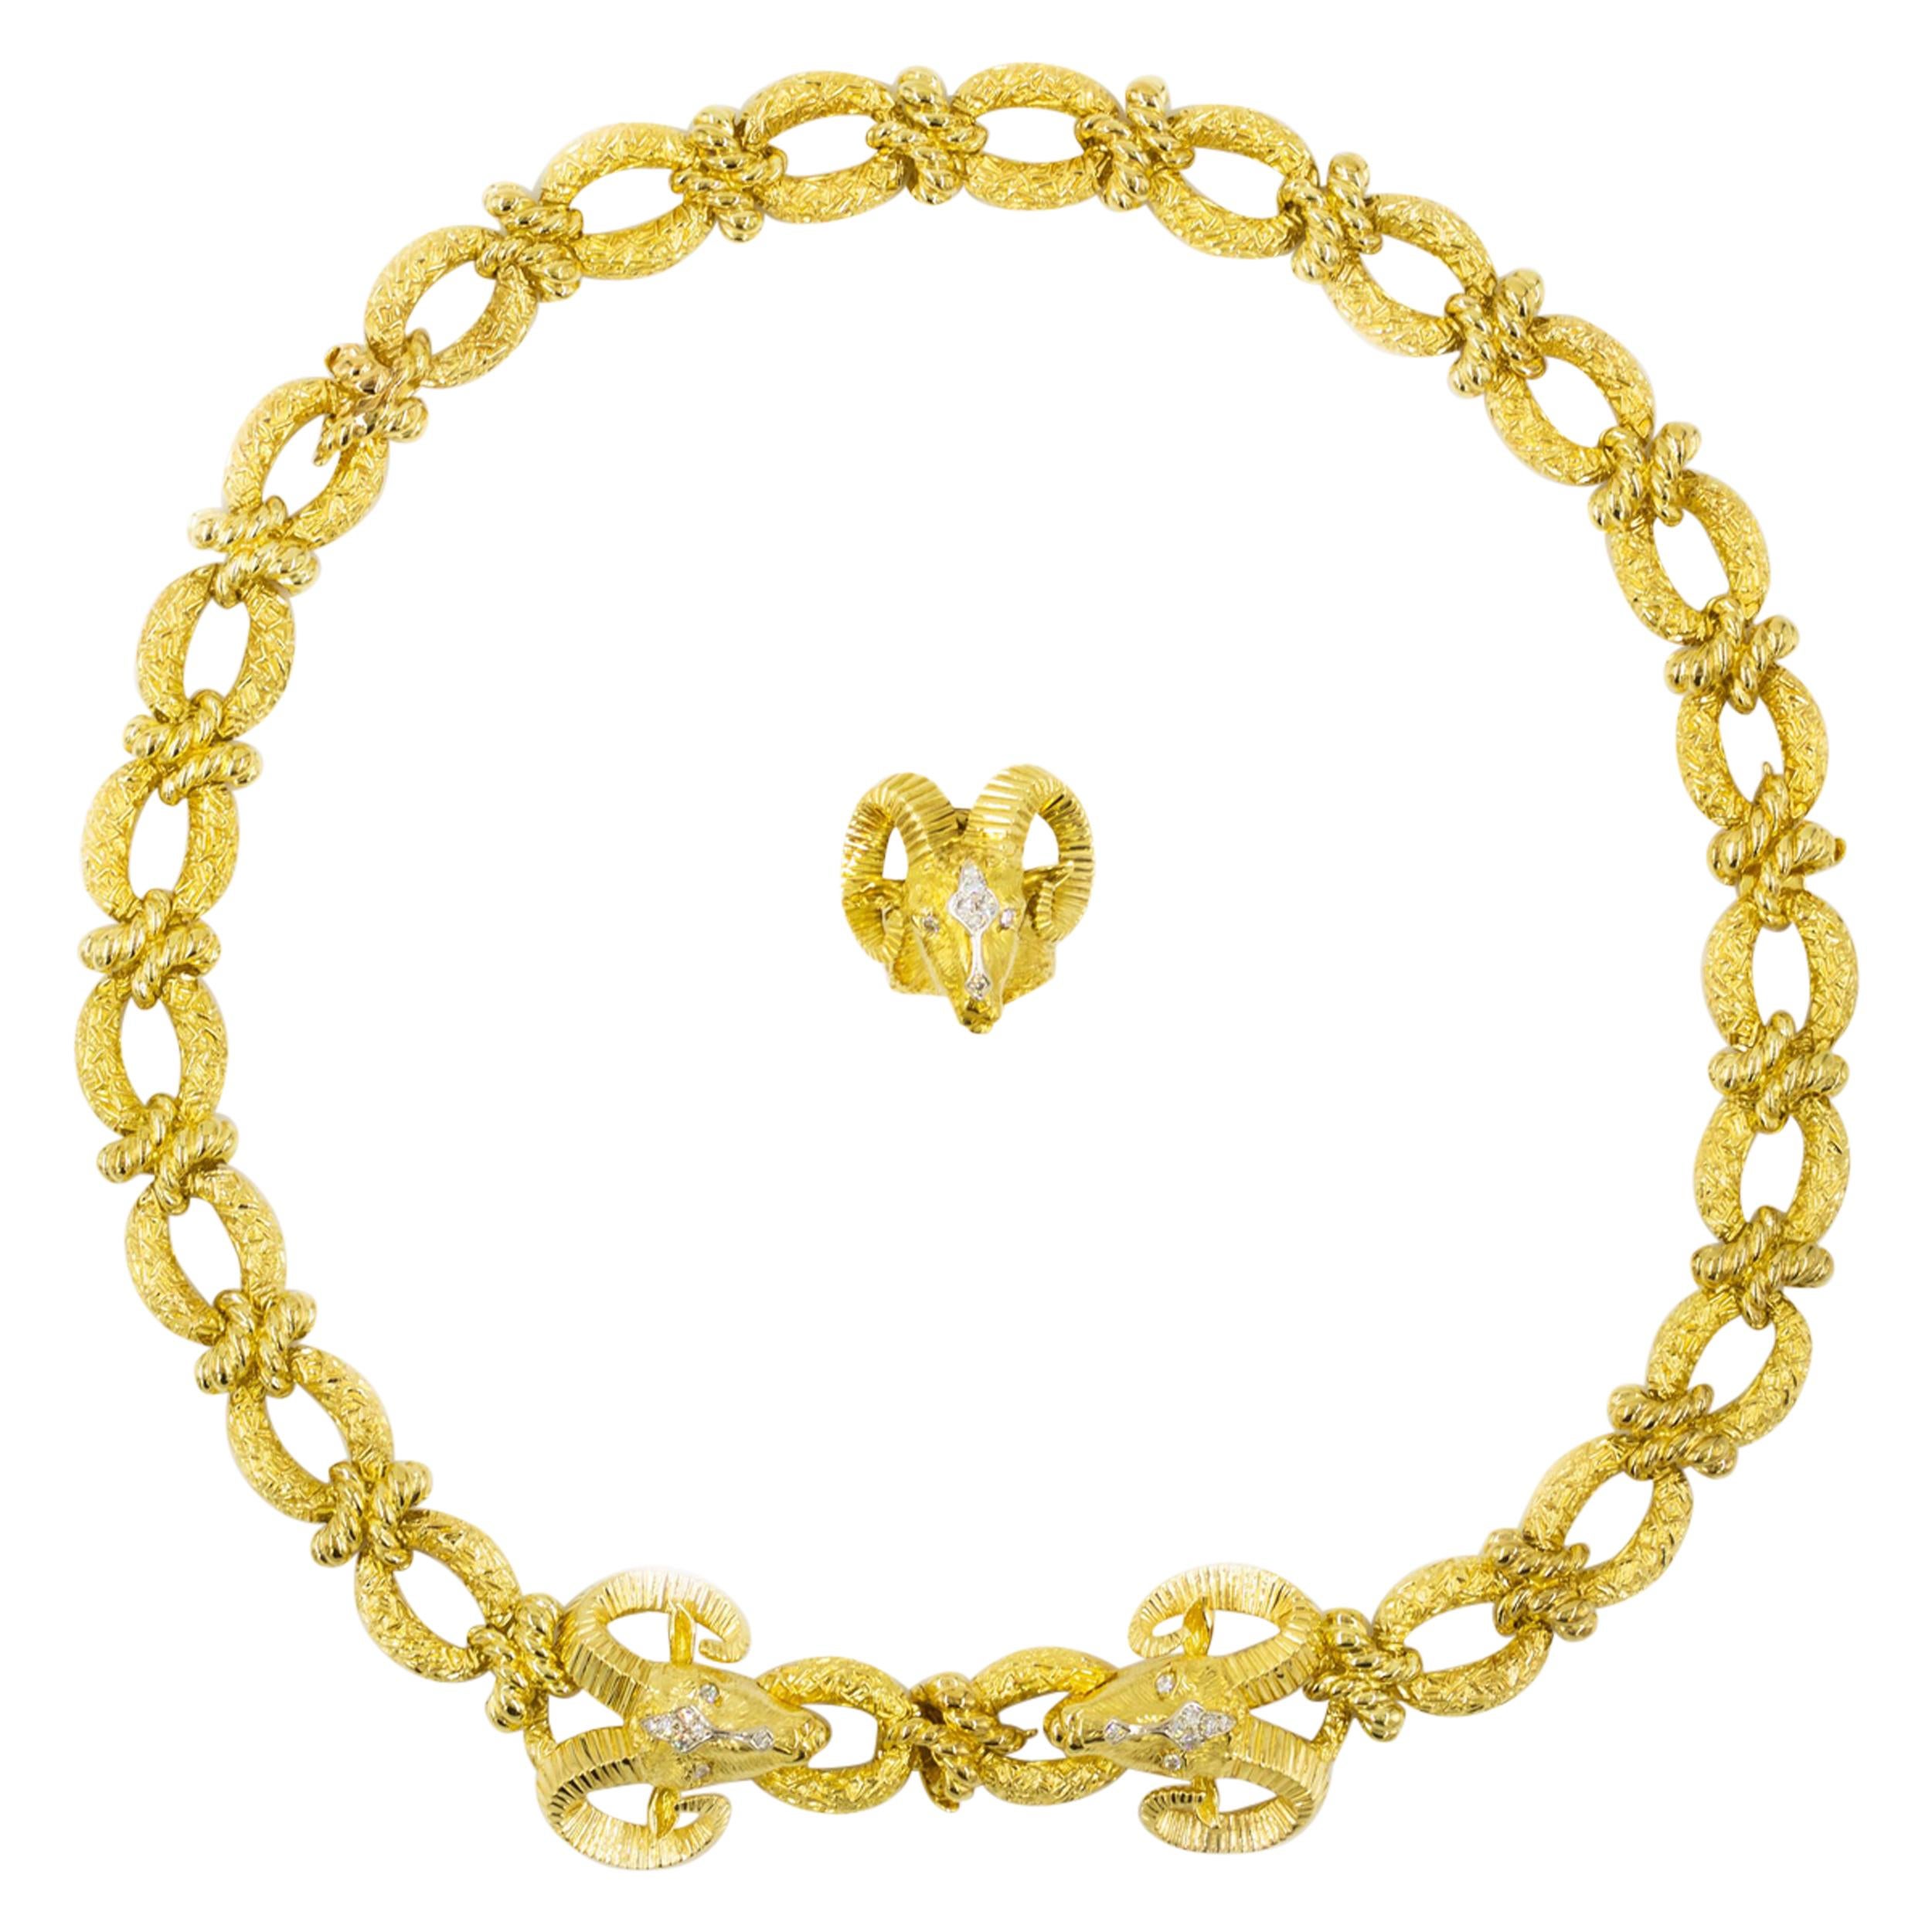 14k Gold Ram's Head Necklace, Bracelet and Ring by La Triomphe, 250.7 grams